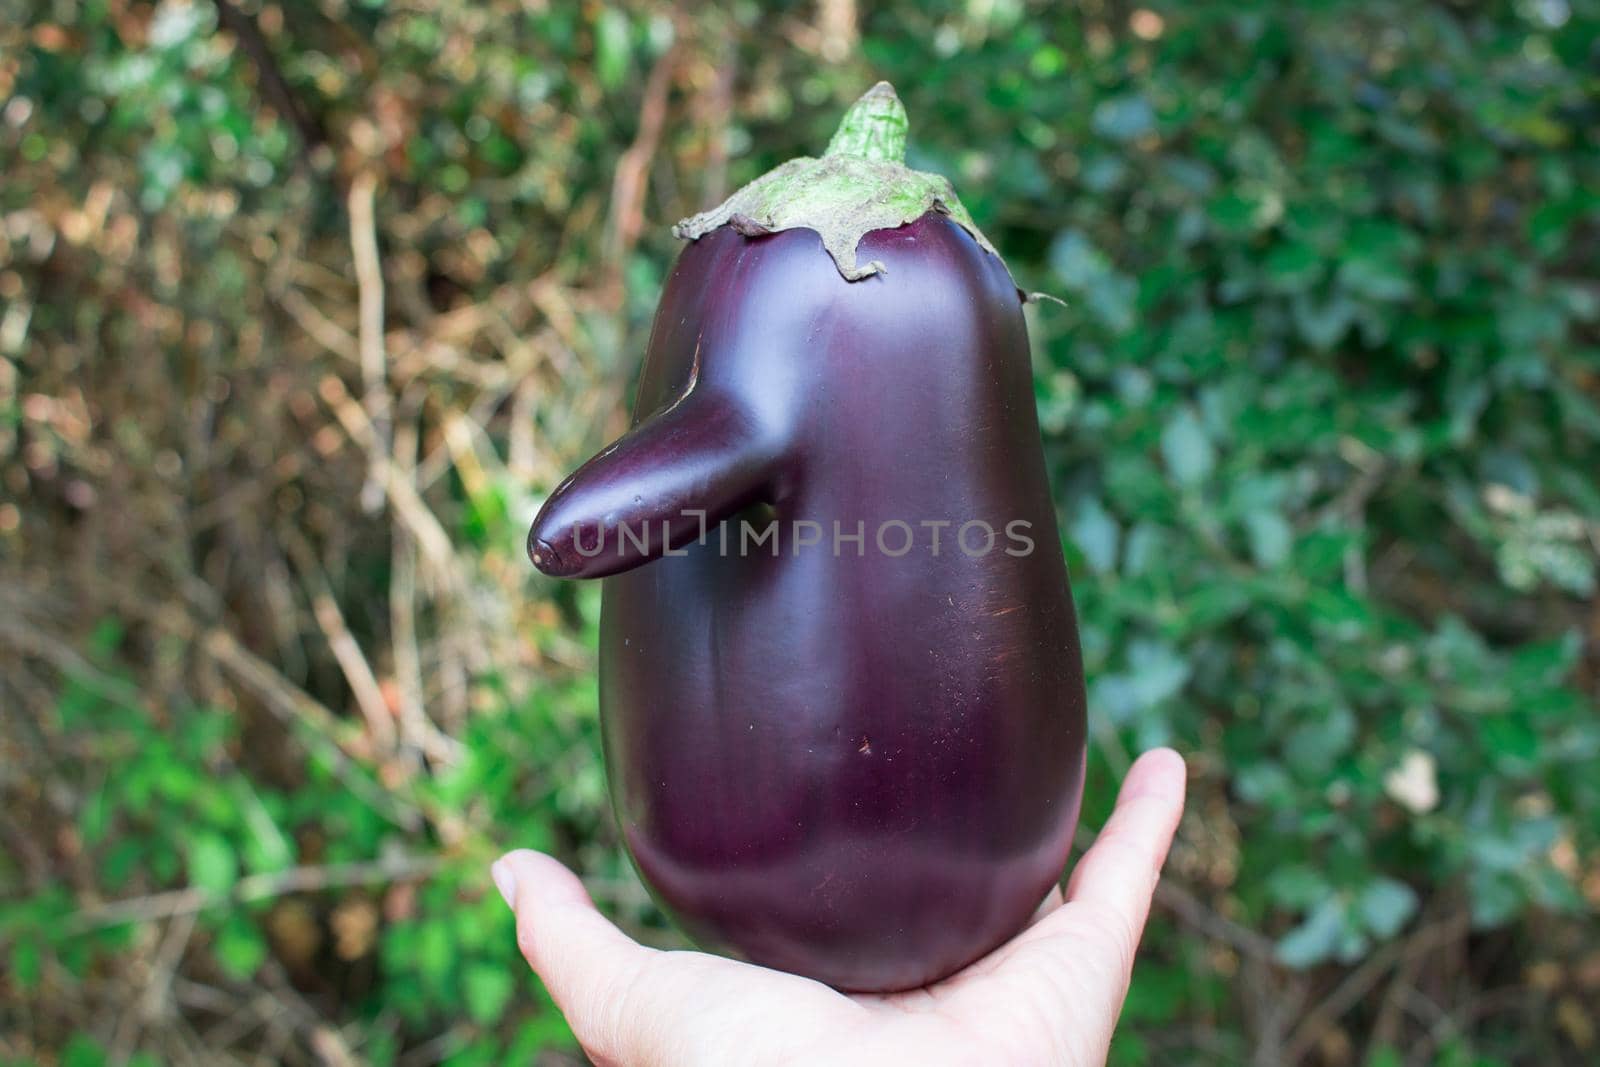 Funny fresh natural organic vegetable eggplant with long nose held in hand by VeraVerano